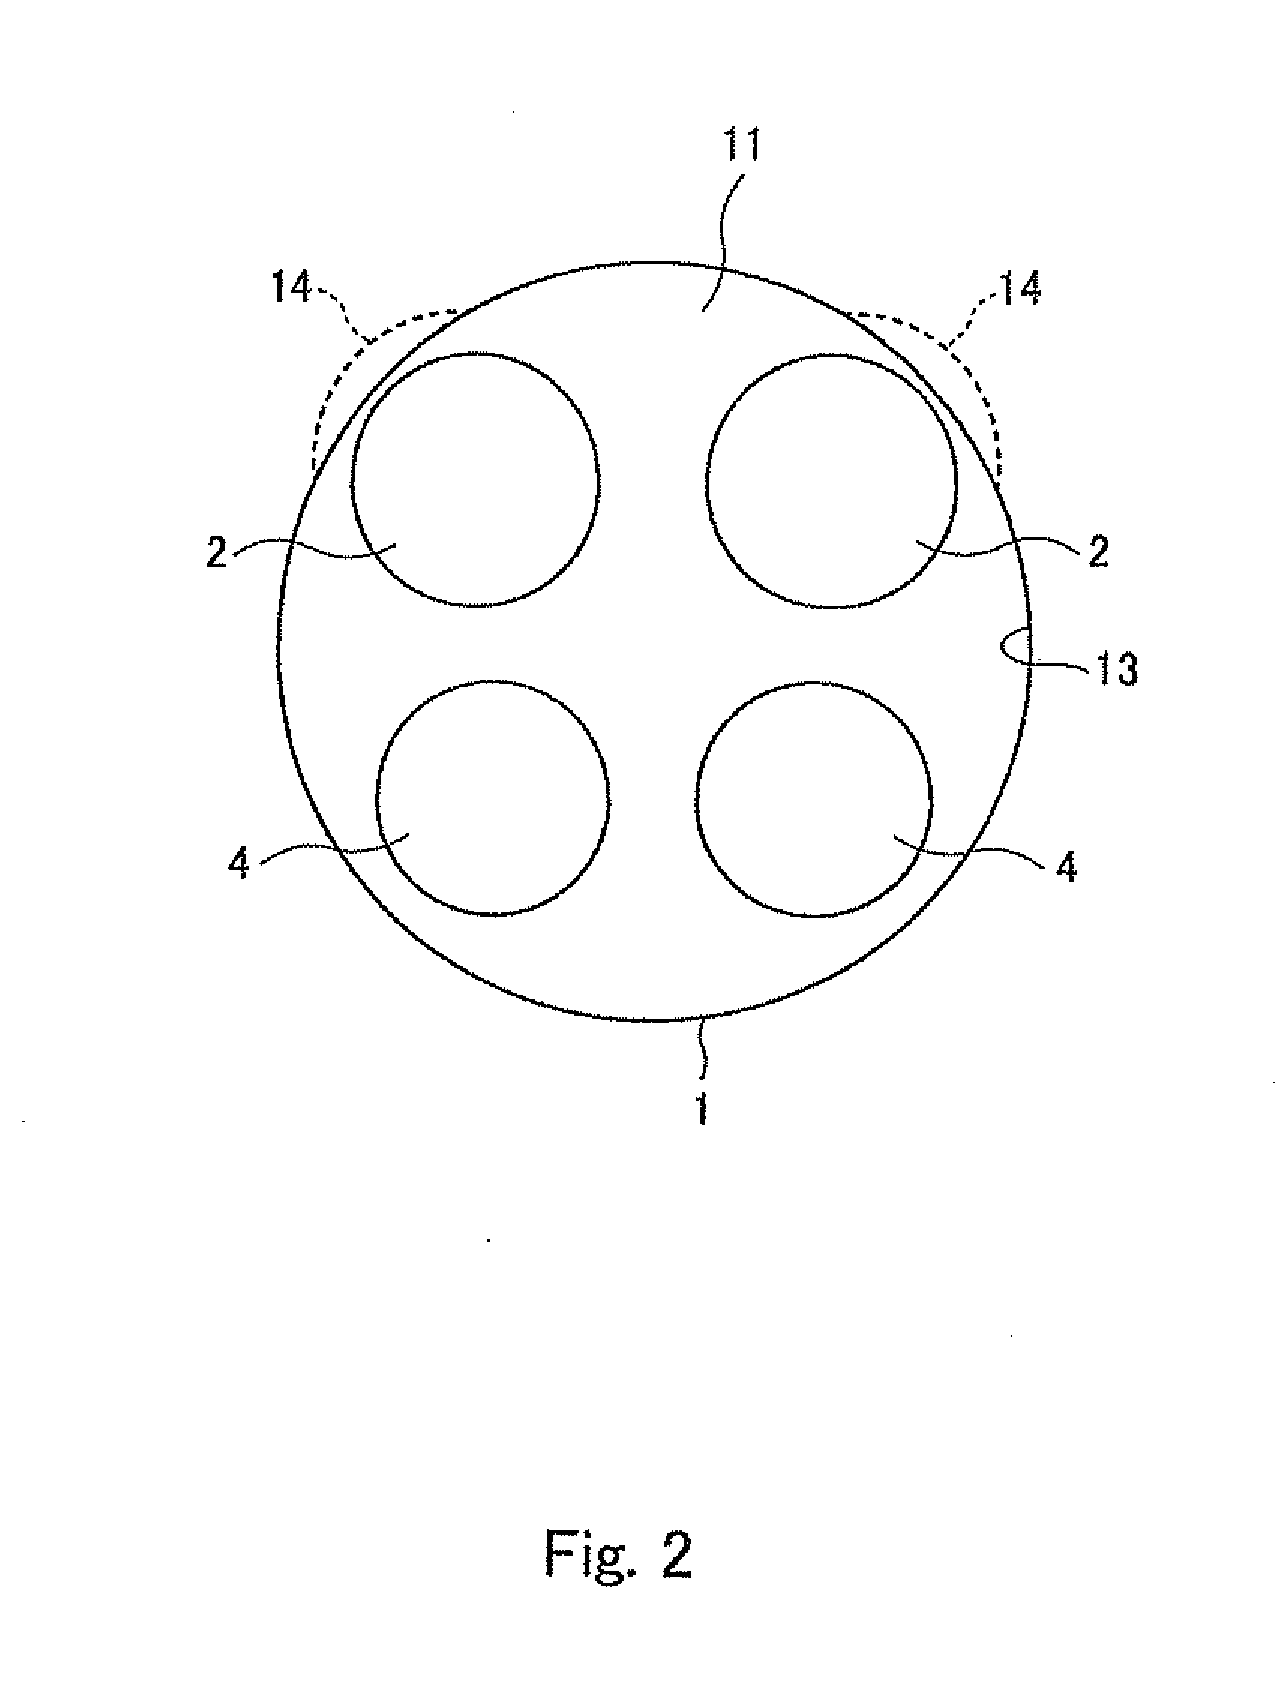 Four-stroke internal combustion engine and exhaust valve